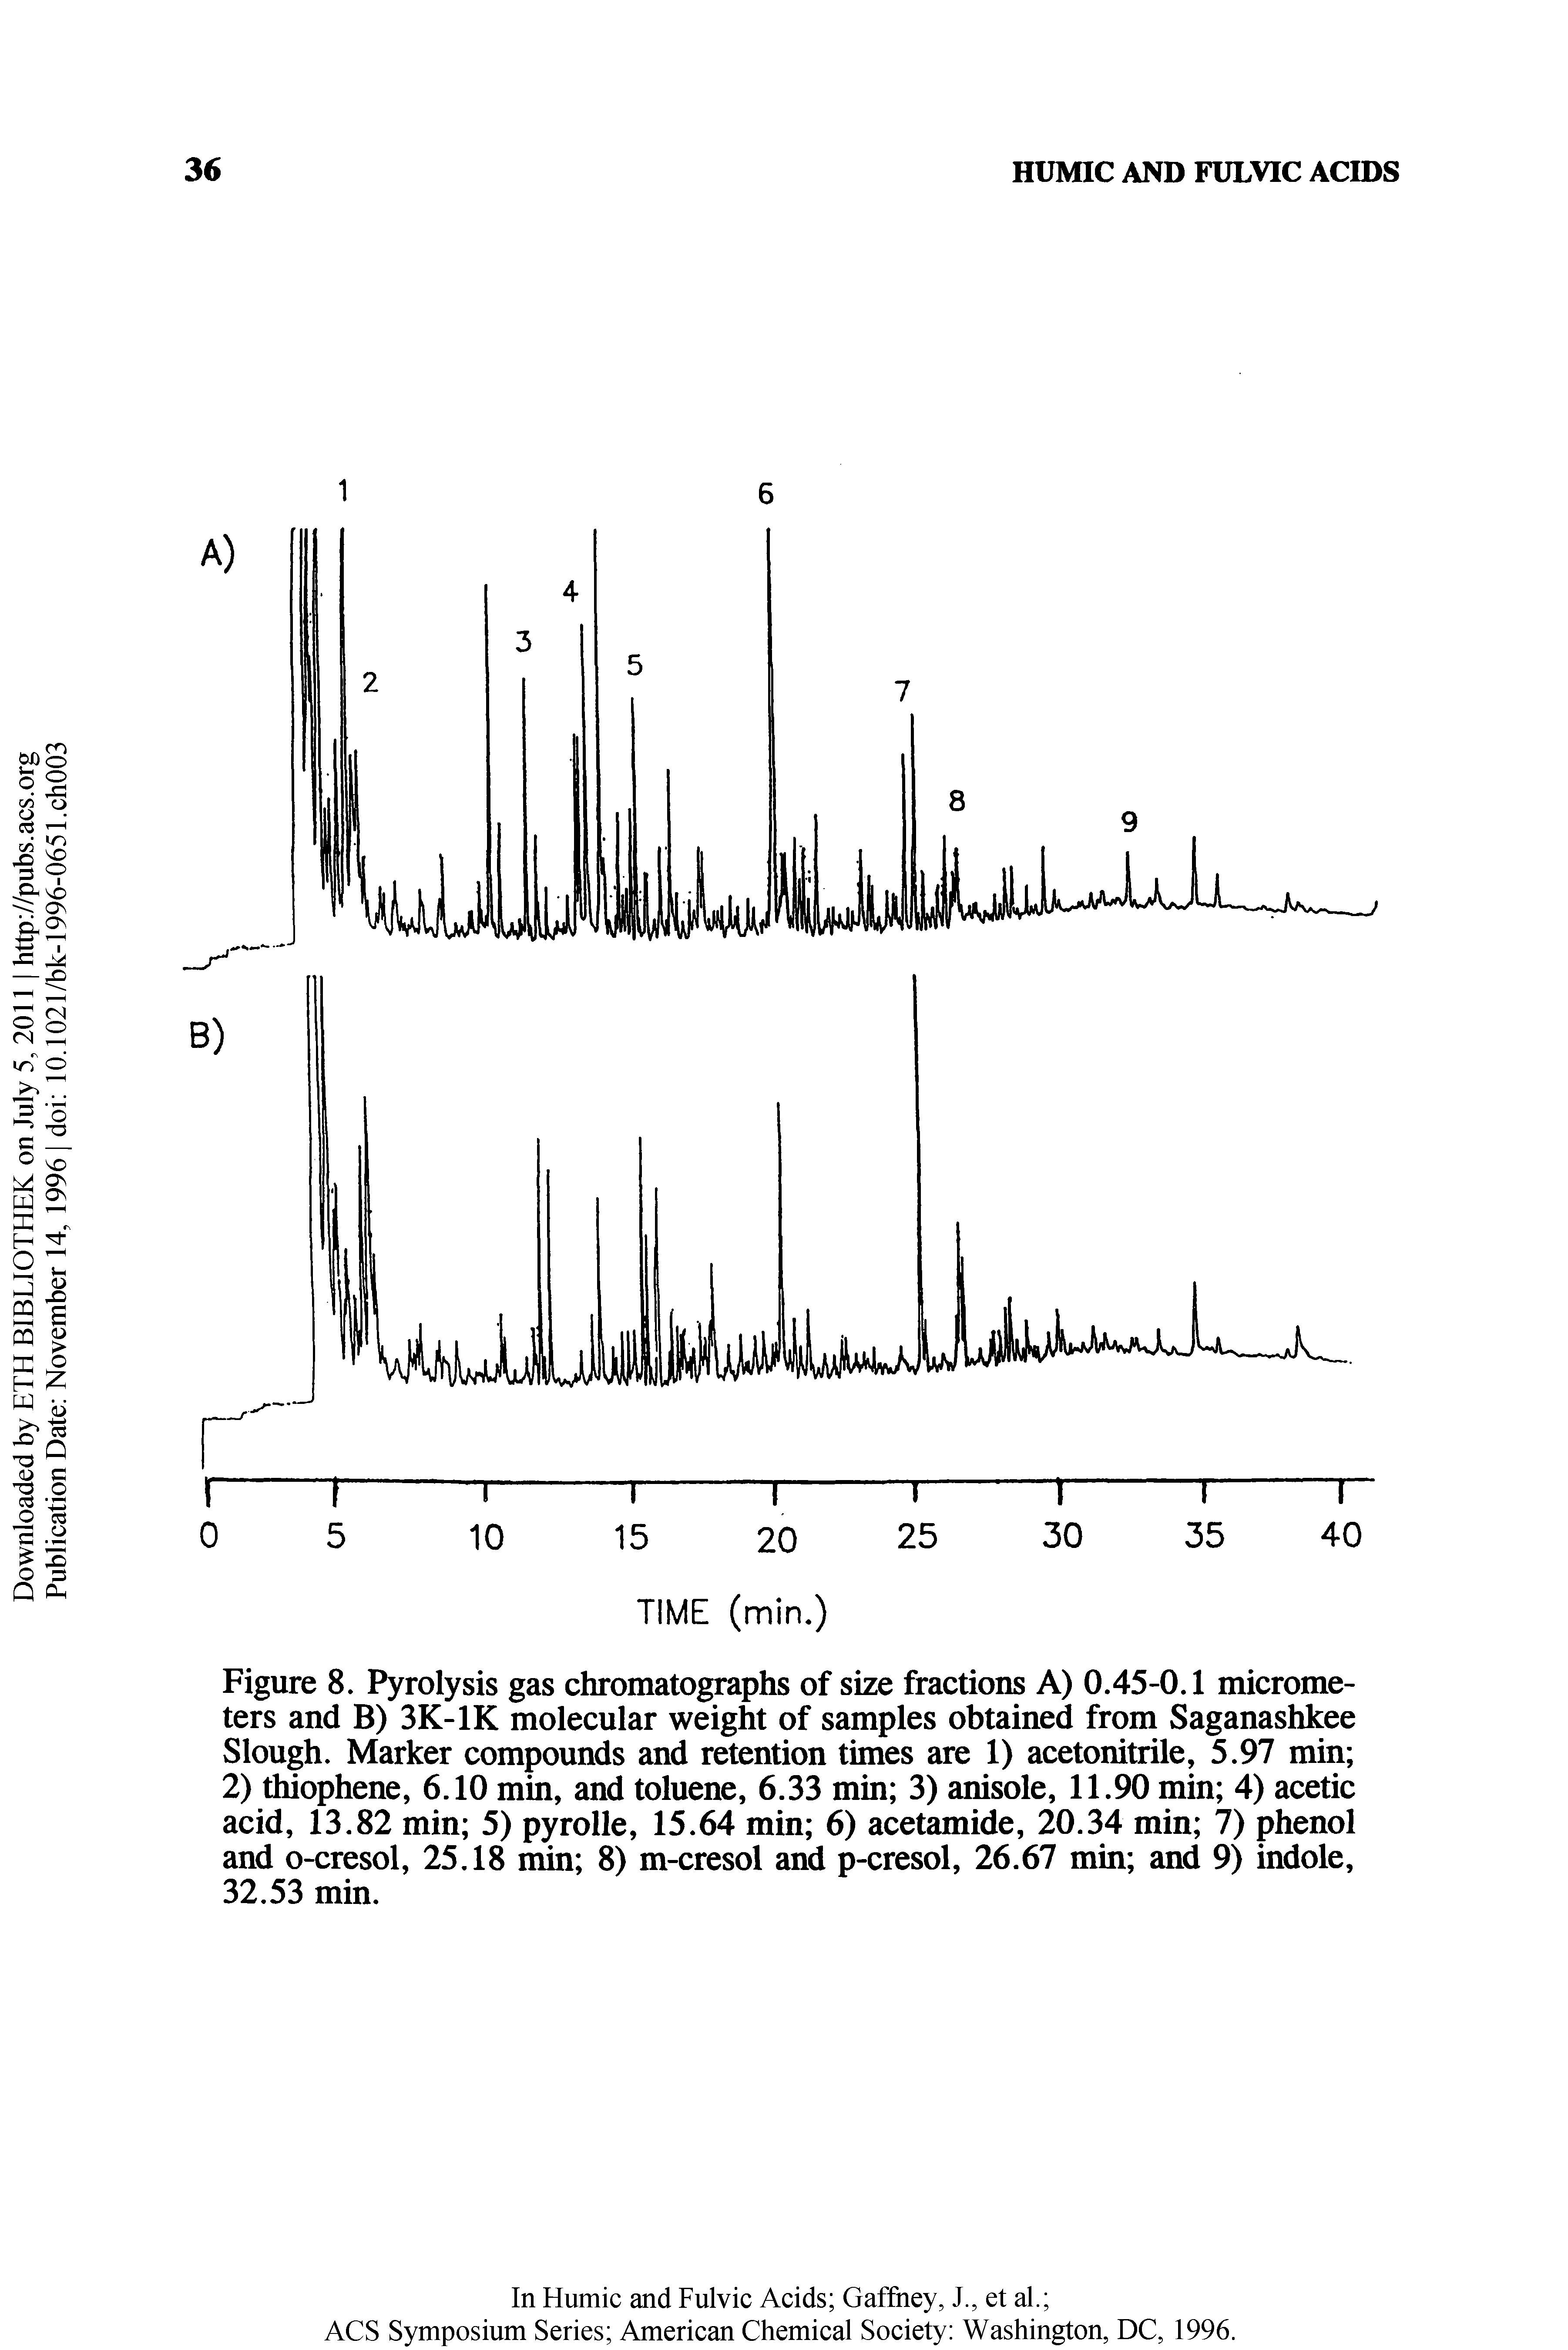 Figure 8. Pyrolysis gas chromatographs of size fractions A) 0.45-0.1 micrometers and B) 3K-1K molecular weight of samples obtained from Saganashkee Slough. Marker compounds and retention times are 1) acetonitrile, 5.97 min 2) thiophene, 6.10 min, and toluene, 6.33 min 3) anisole, 11.90 min 4) acetic acid, 13.82 min 5) pyrolle, 15.64 min 6) acetamide, 20.34 min 7) phenol and o-cresol, 25,18 min 8) m-cresol and p-cresol, 26.67 min and 9) indole, 32.53 min.